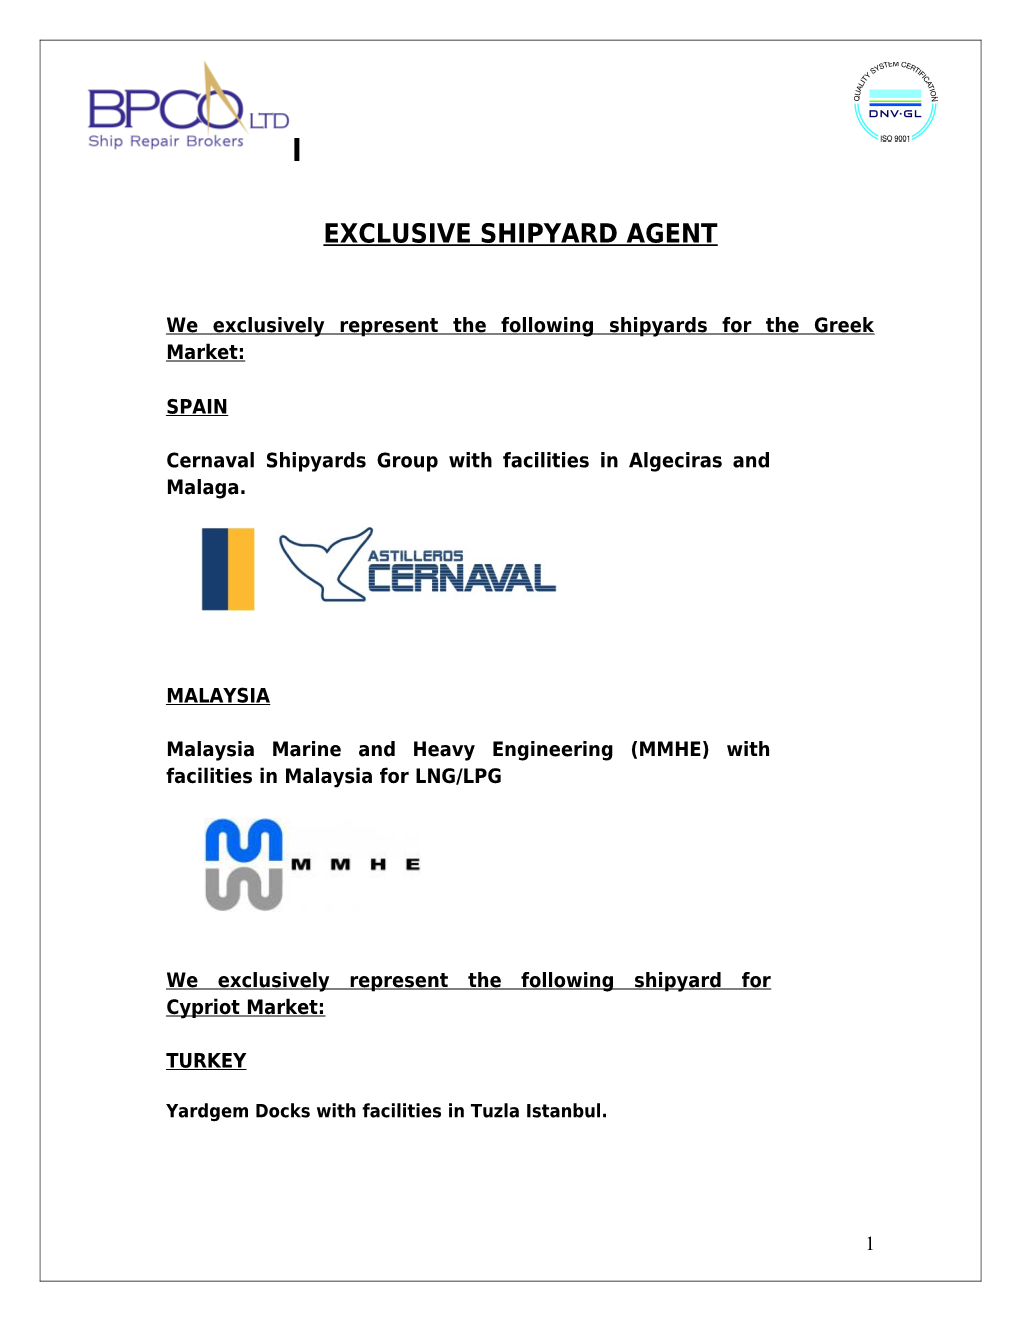 Exclusive Shipyard Agent